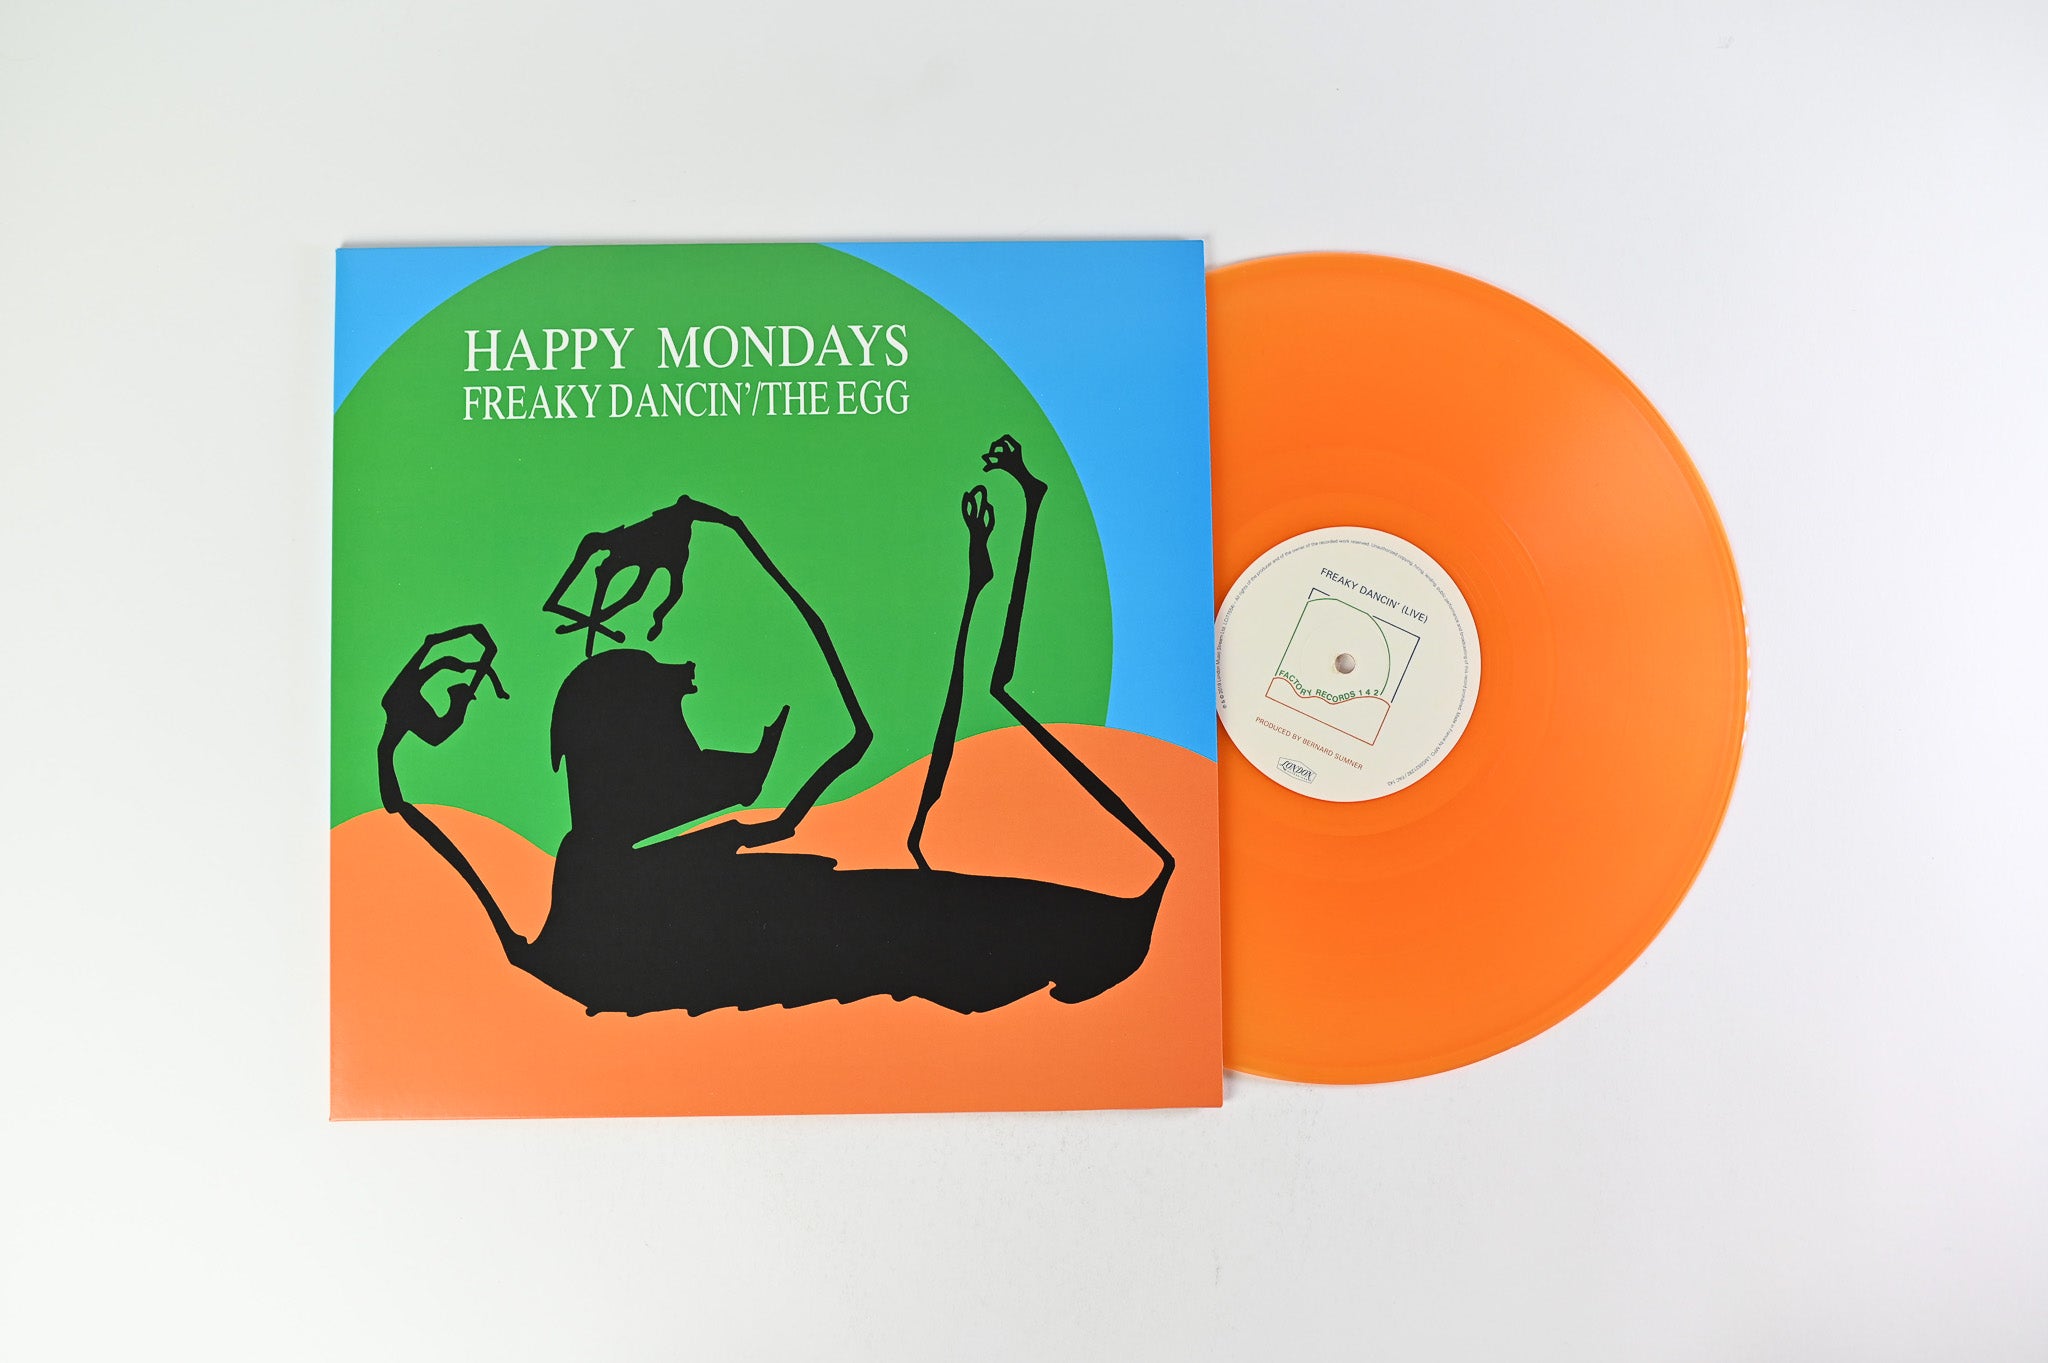 Happy Mondays - The Early EP's on London Colored Vinyl Box Set